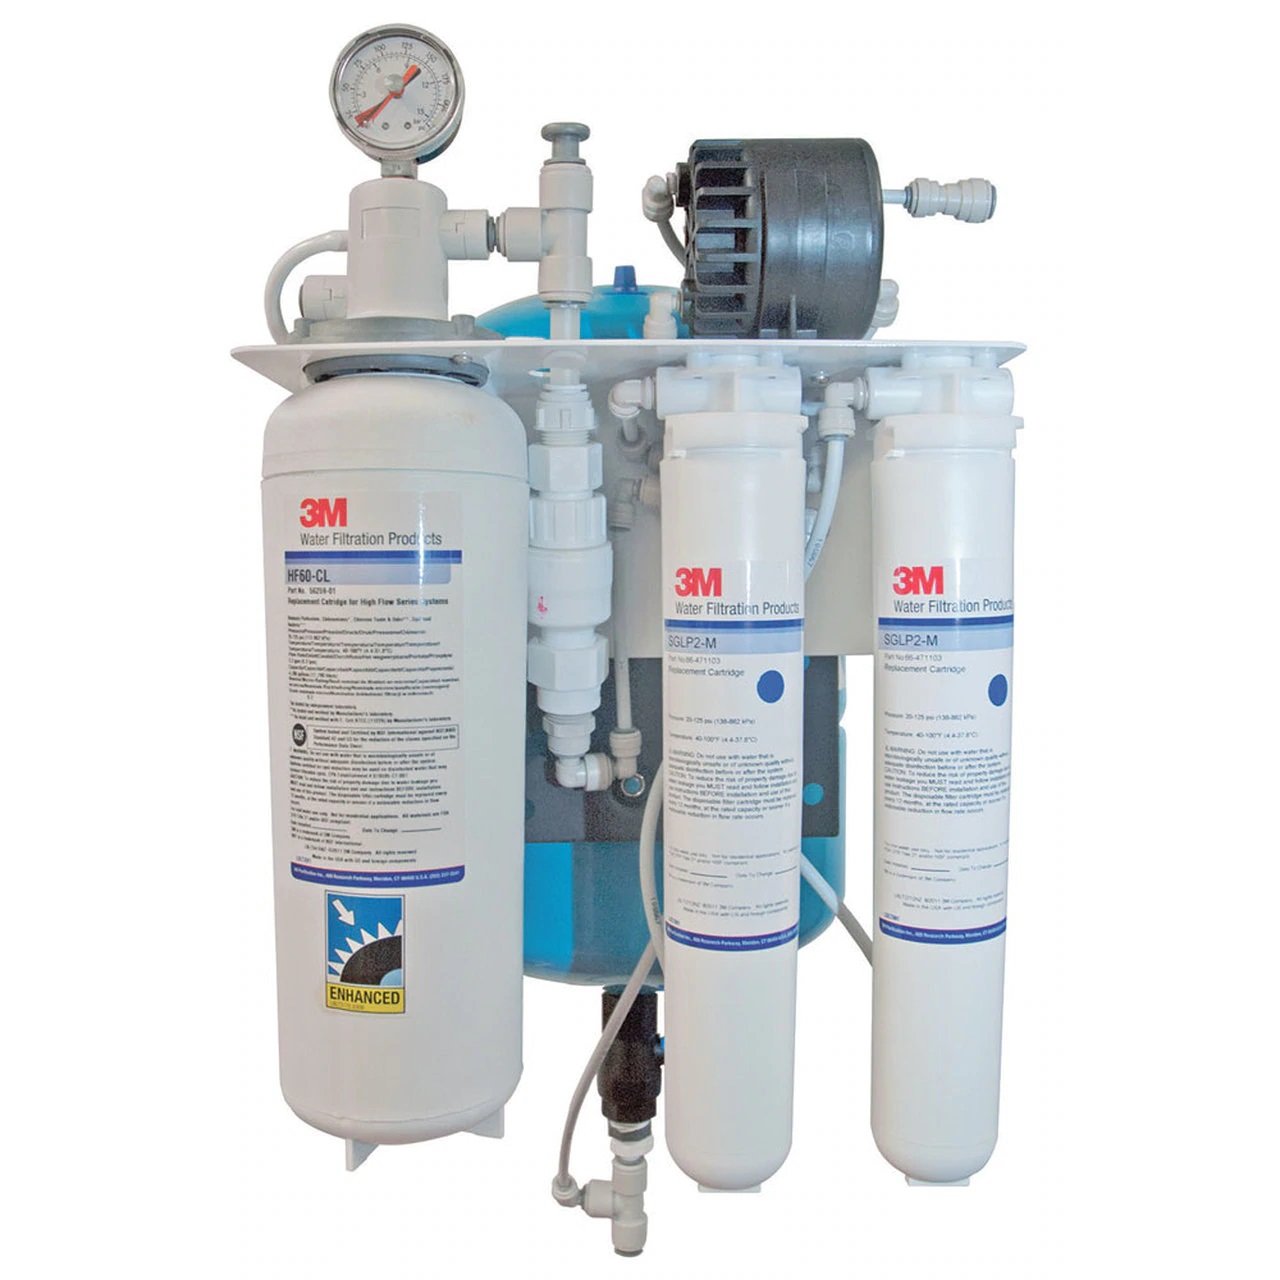 3M SGLP200-CL Reverse Osmosis Filtration System